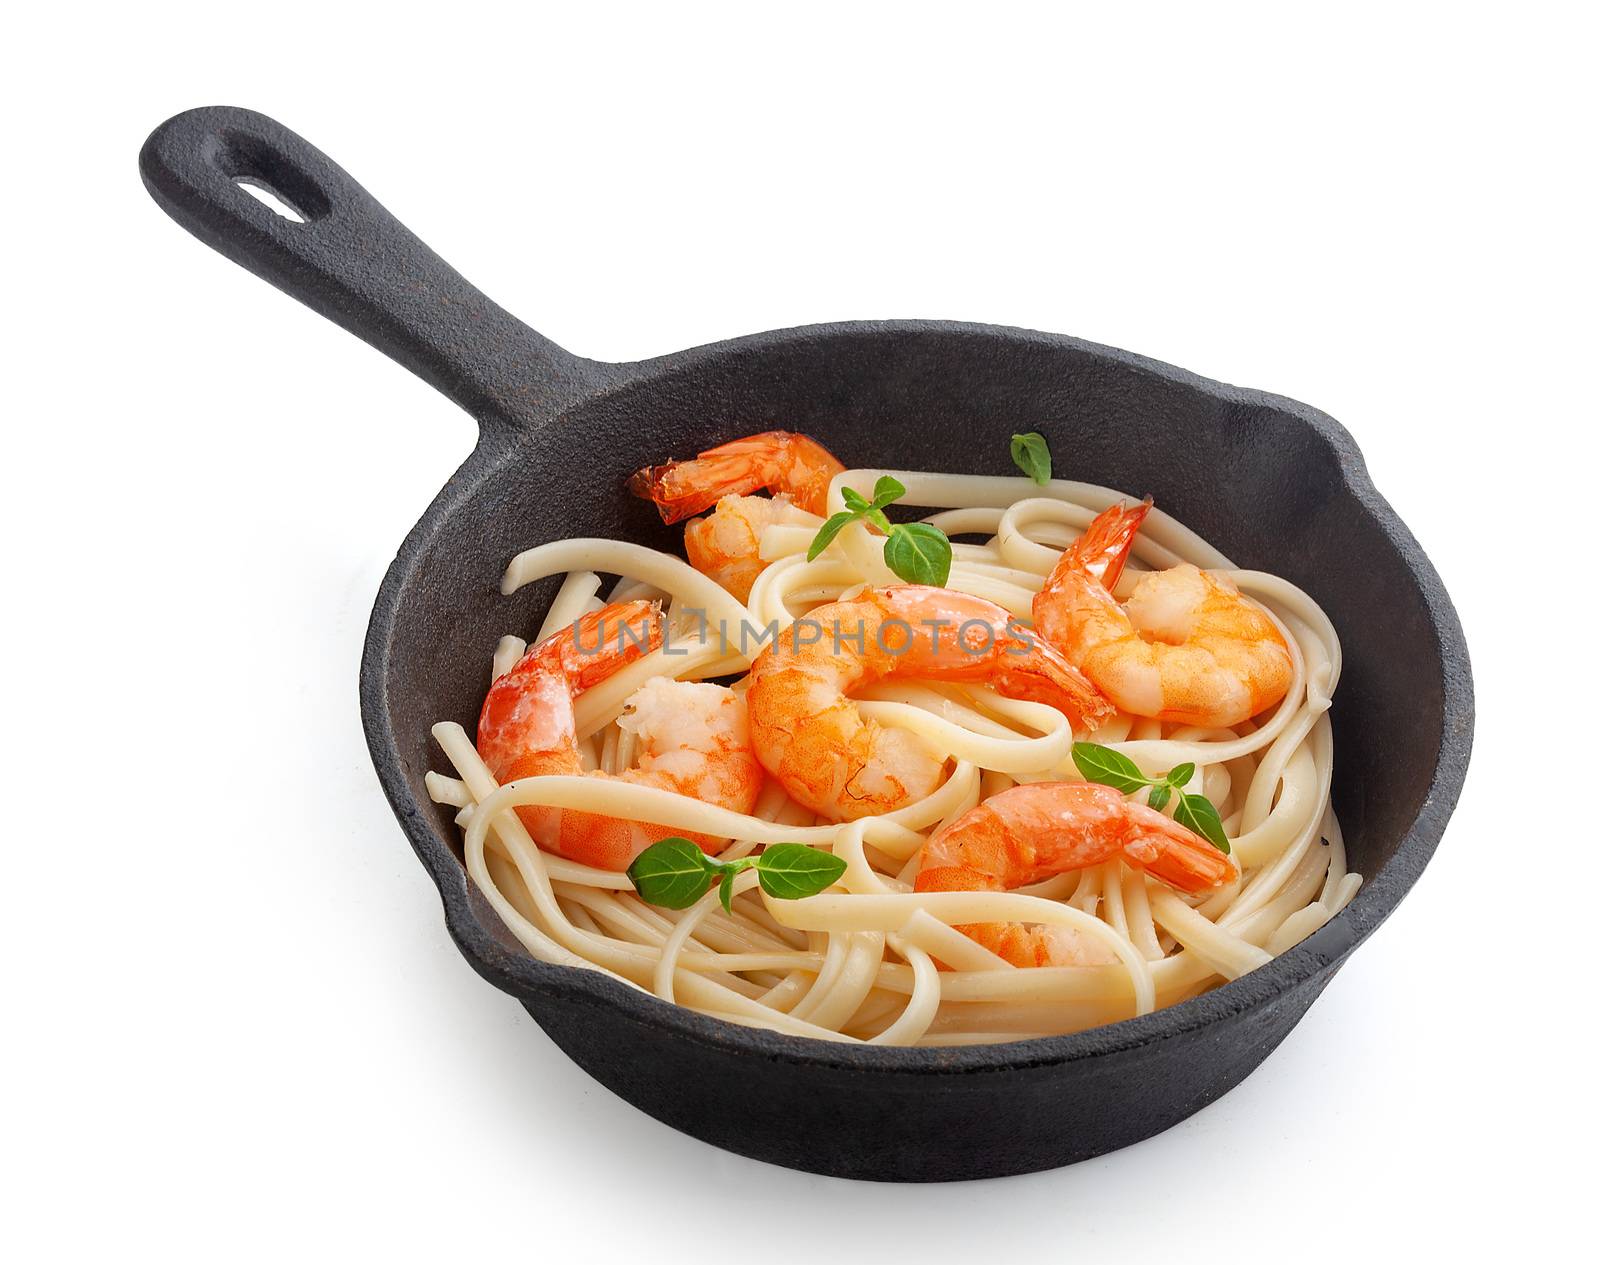 Fried shrimps with prepared pasta in the iron pan